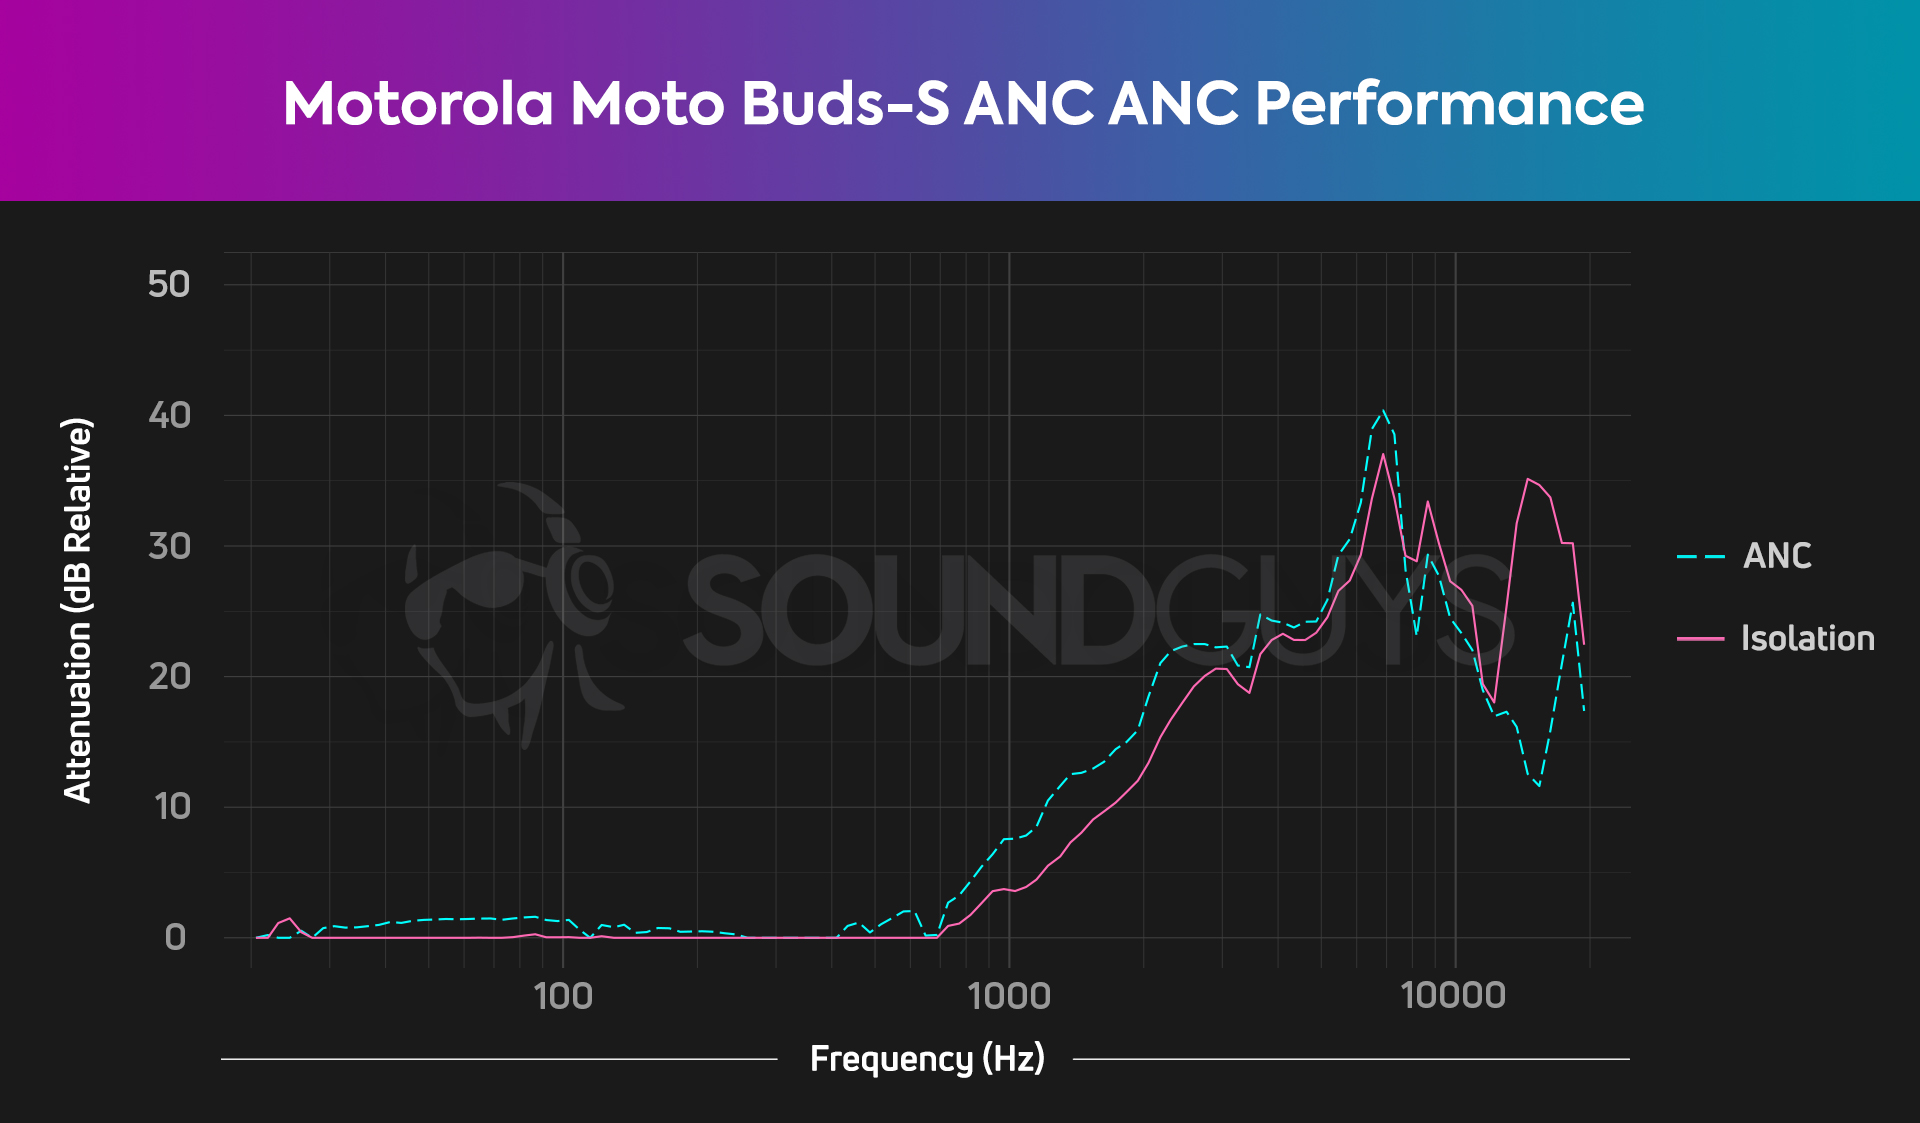 An ANC chart for the Motorola Moto Buds-S ANC, which shows negligible noise canceling and isolation attenuation.